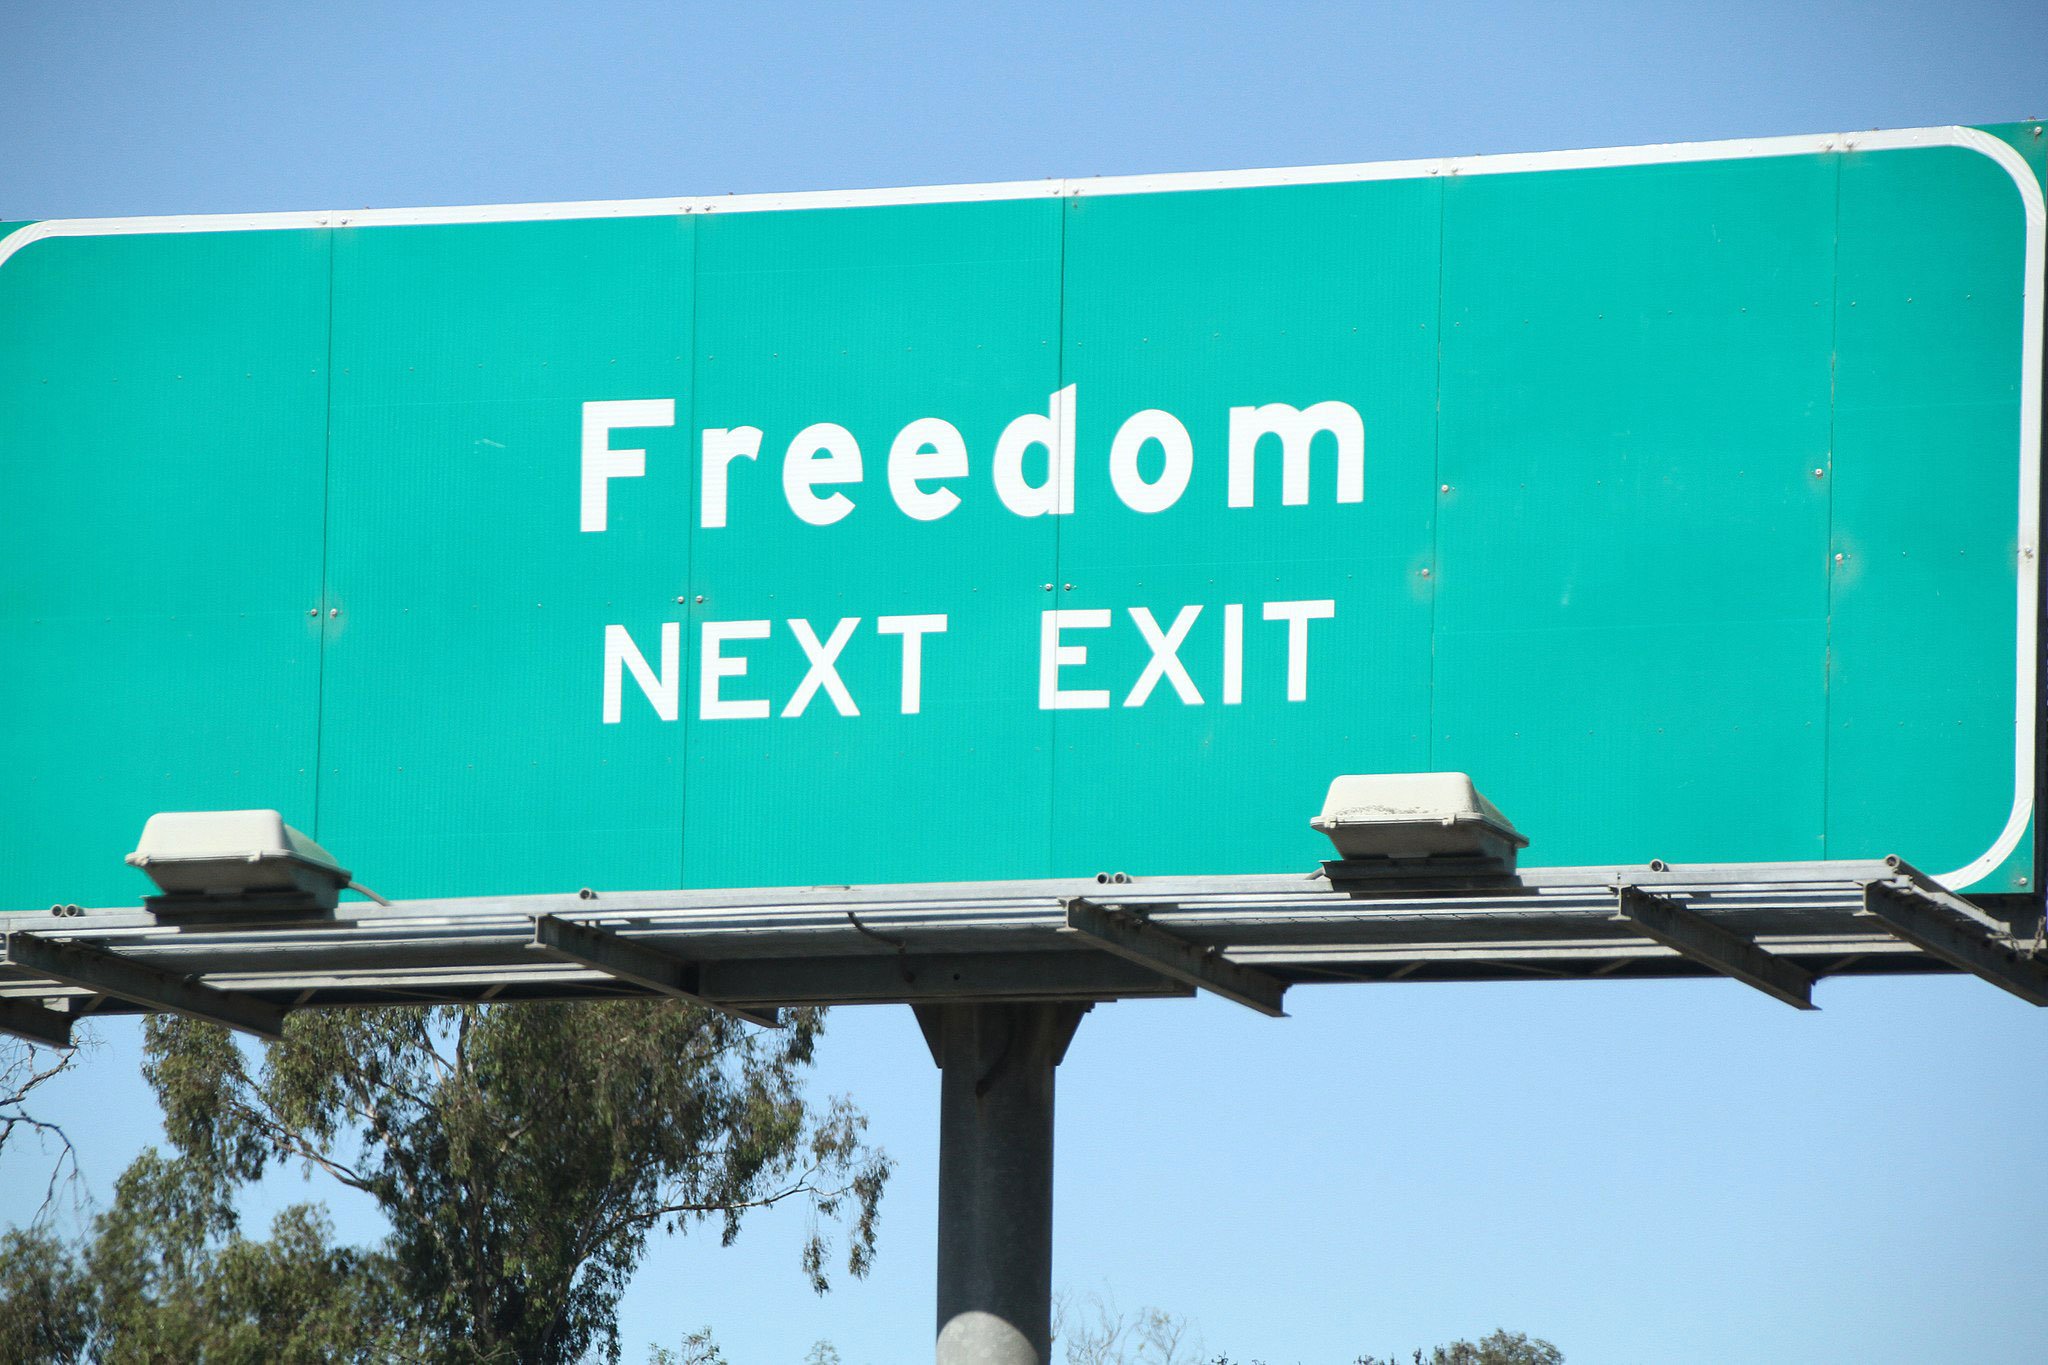 Freedom support. Next exit poster. Next and exit picture.